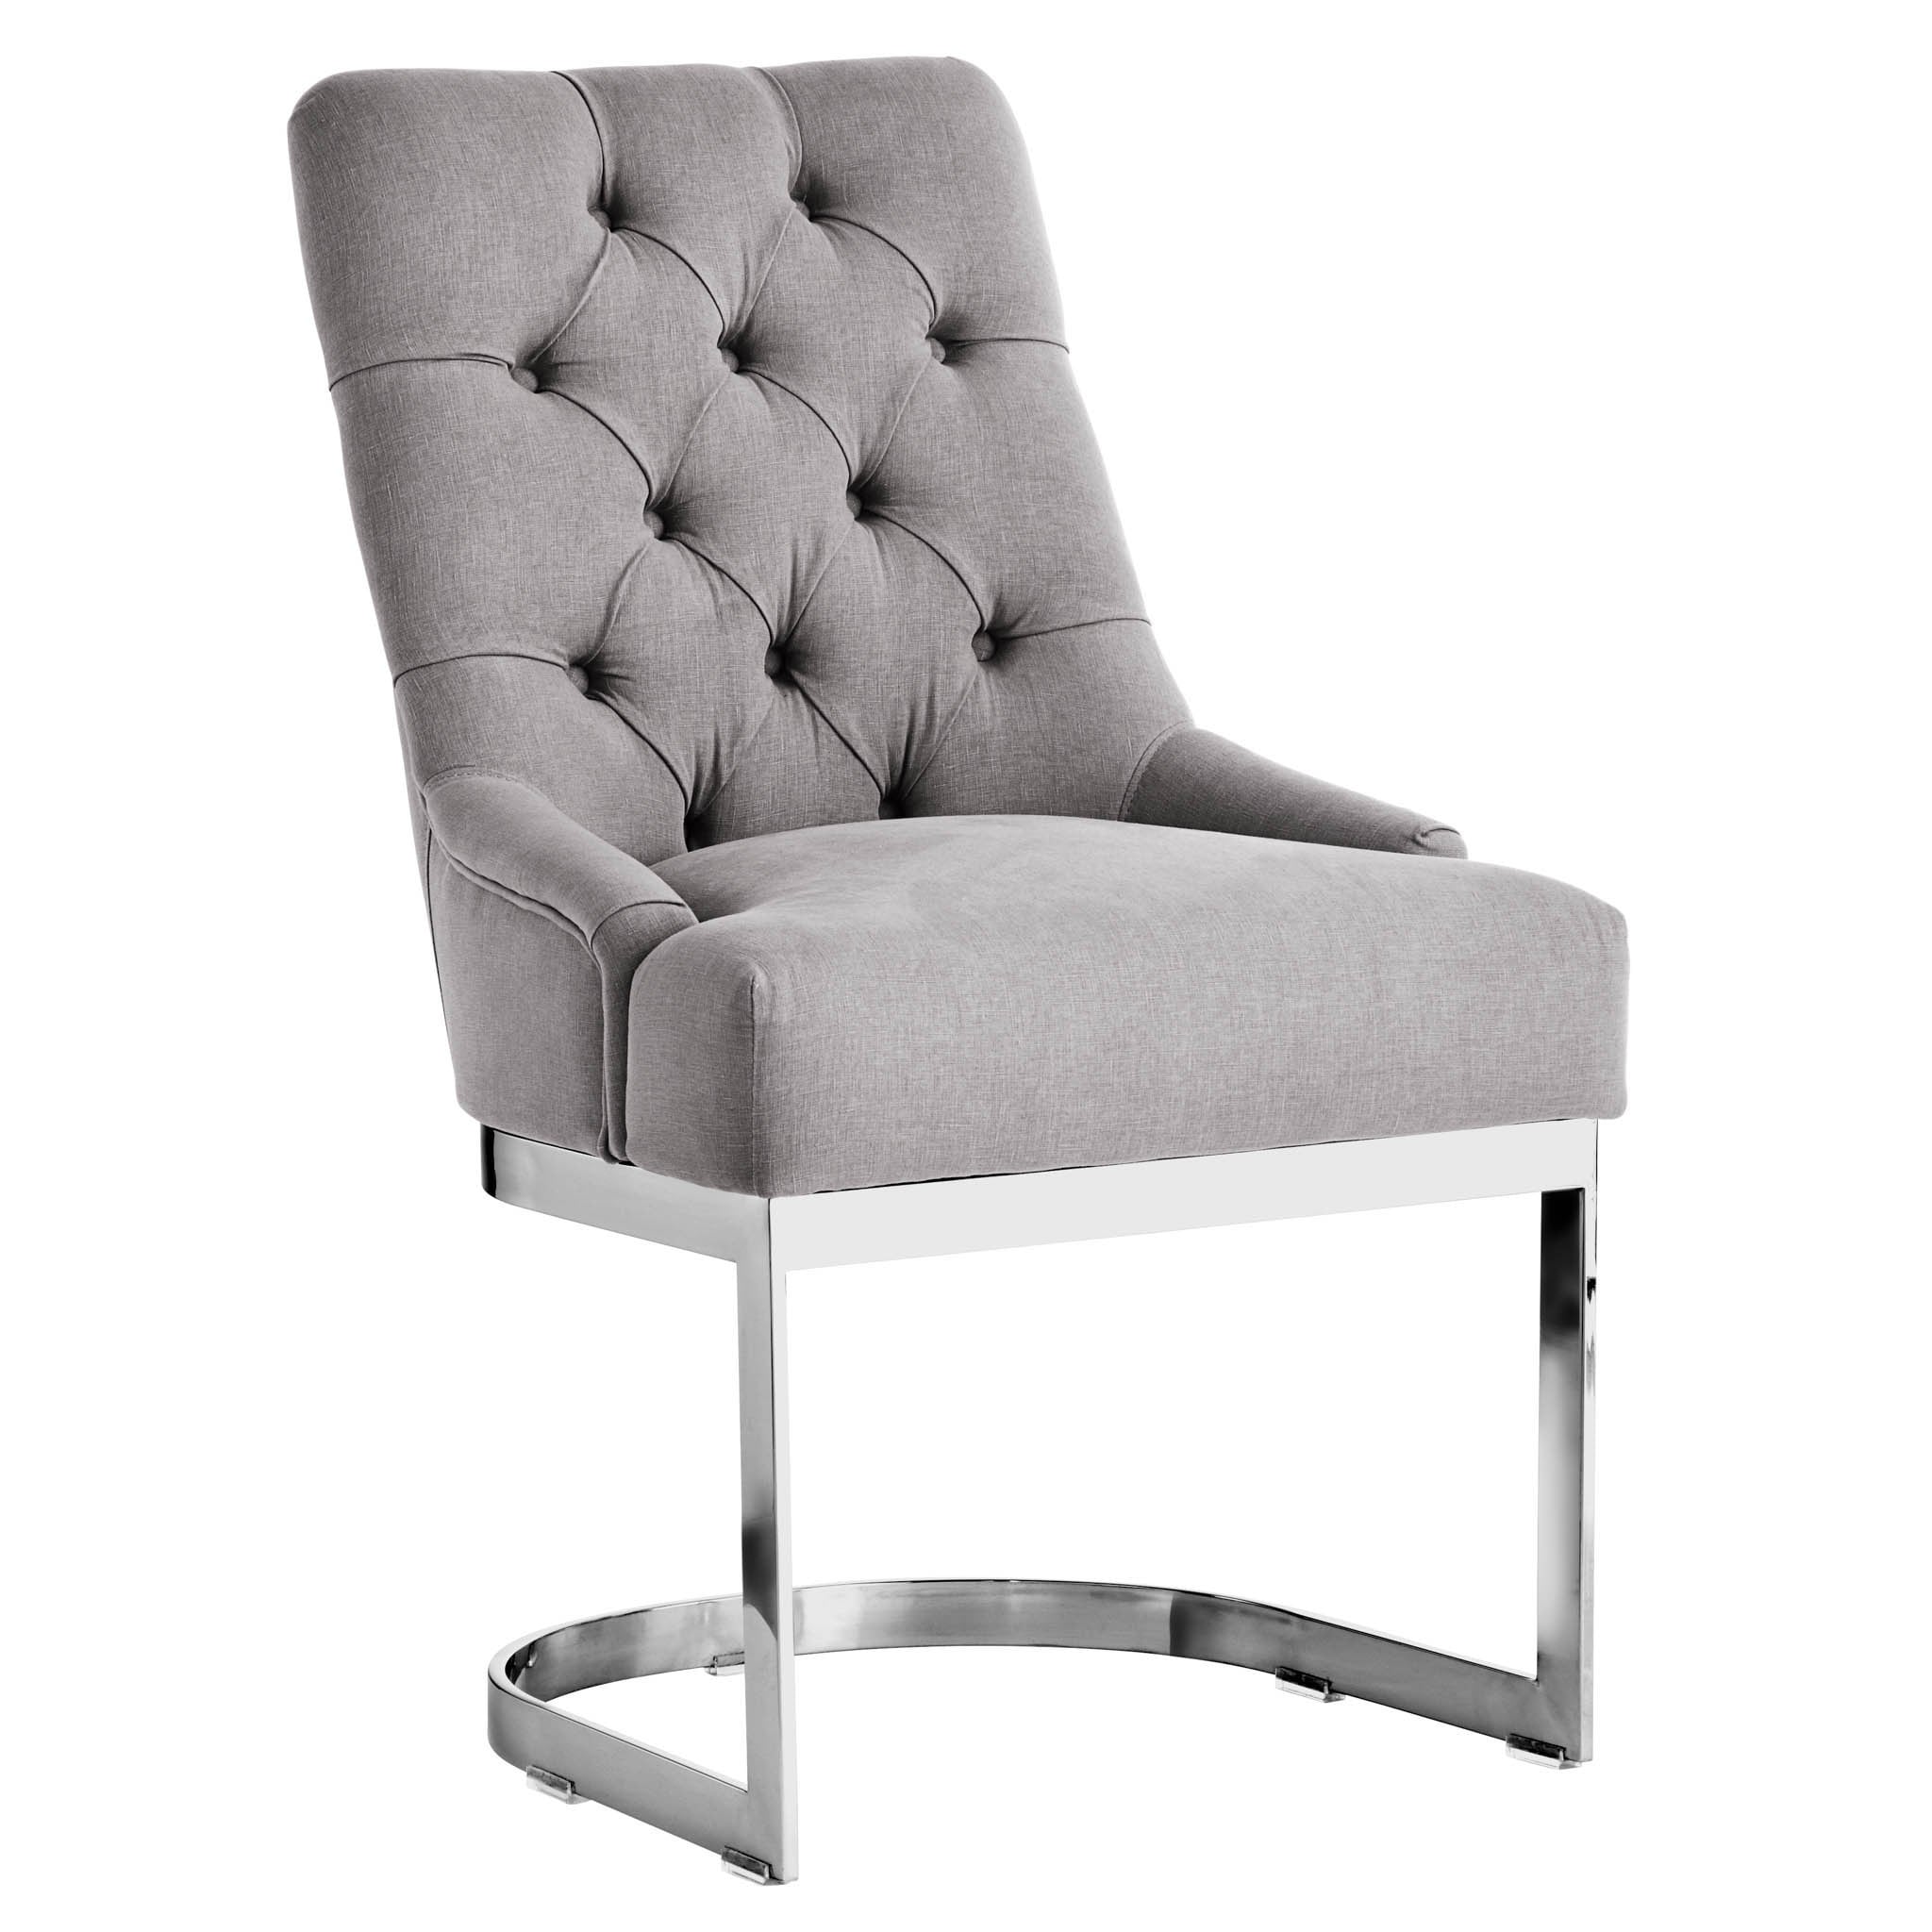 Hoxton Vintage Linen Grey Upholstered Dining Chair